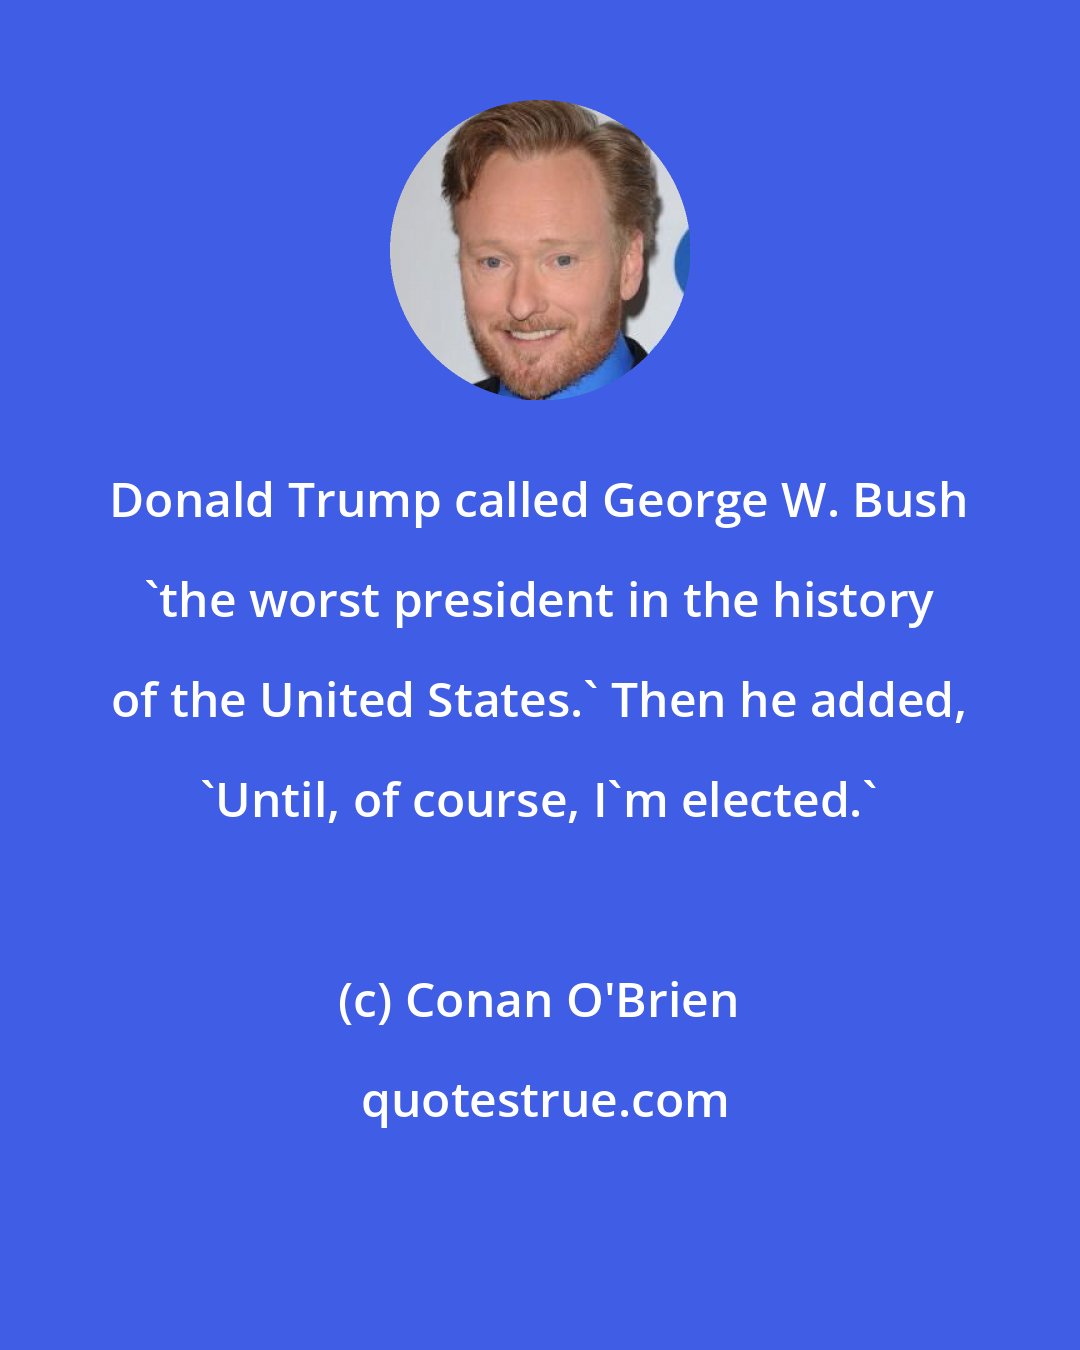 Conan O'Brien: Donald Trump called George W. Bush 'the worst president in the history of the United States.' Then he added, 'Until, of course, I'm elected.'